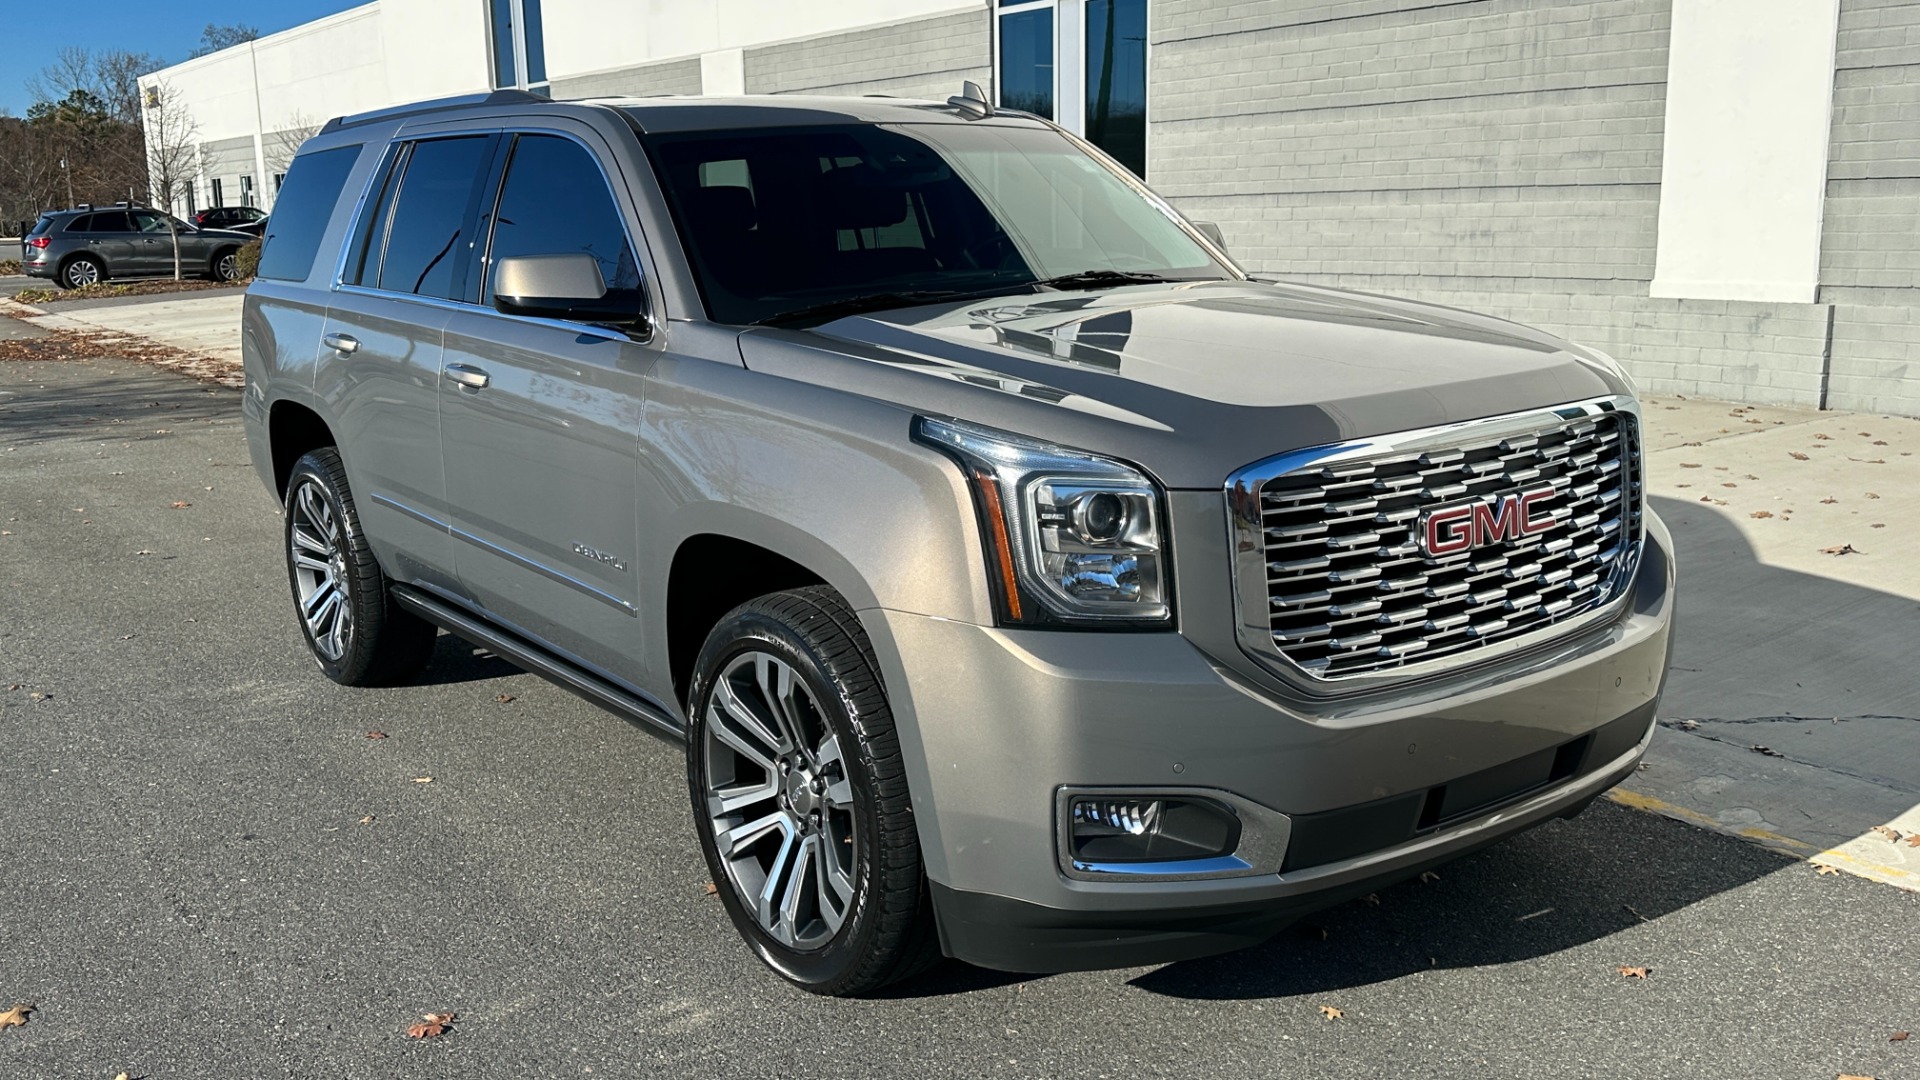 Used 2019 GMC Yukon DENALI ULTIMATE / DVD / CAPTAINS CHAIRS / 3RD ROW / LEATHER / NAV for sale Sold at Formula Imports in Charlotte NC 28227 2